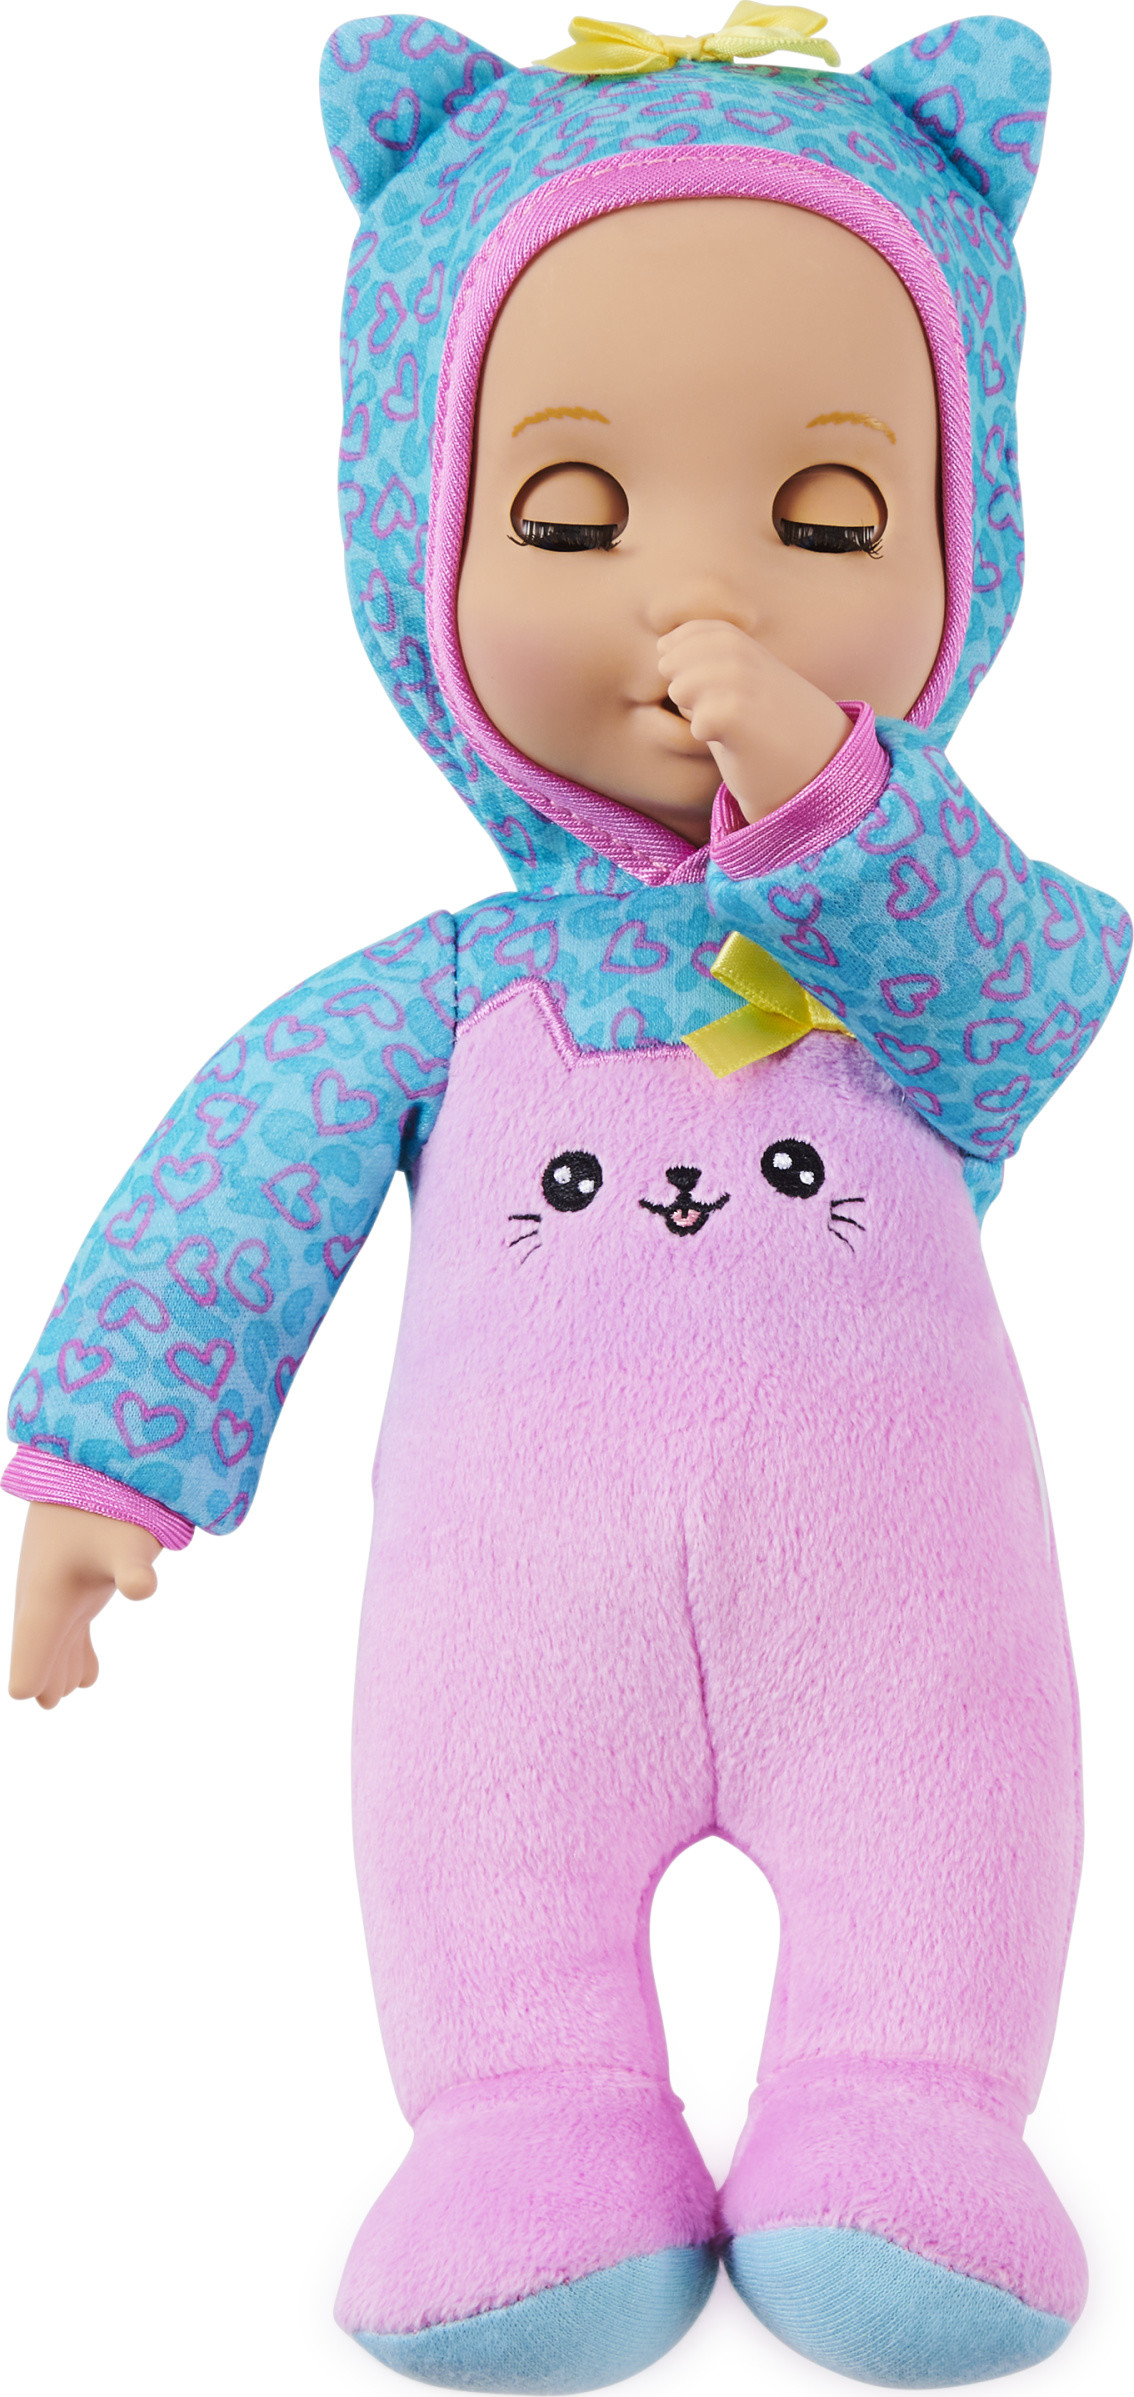 Luvzies by Luvabella, Kitten Onesie 11-inch Cuddly Baby Doll with Bottle Accessory, for Kids Aged 4 and up - image 4 of 5